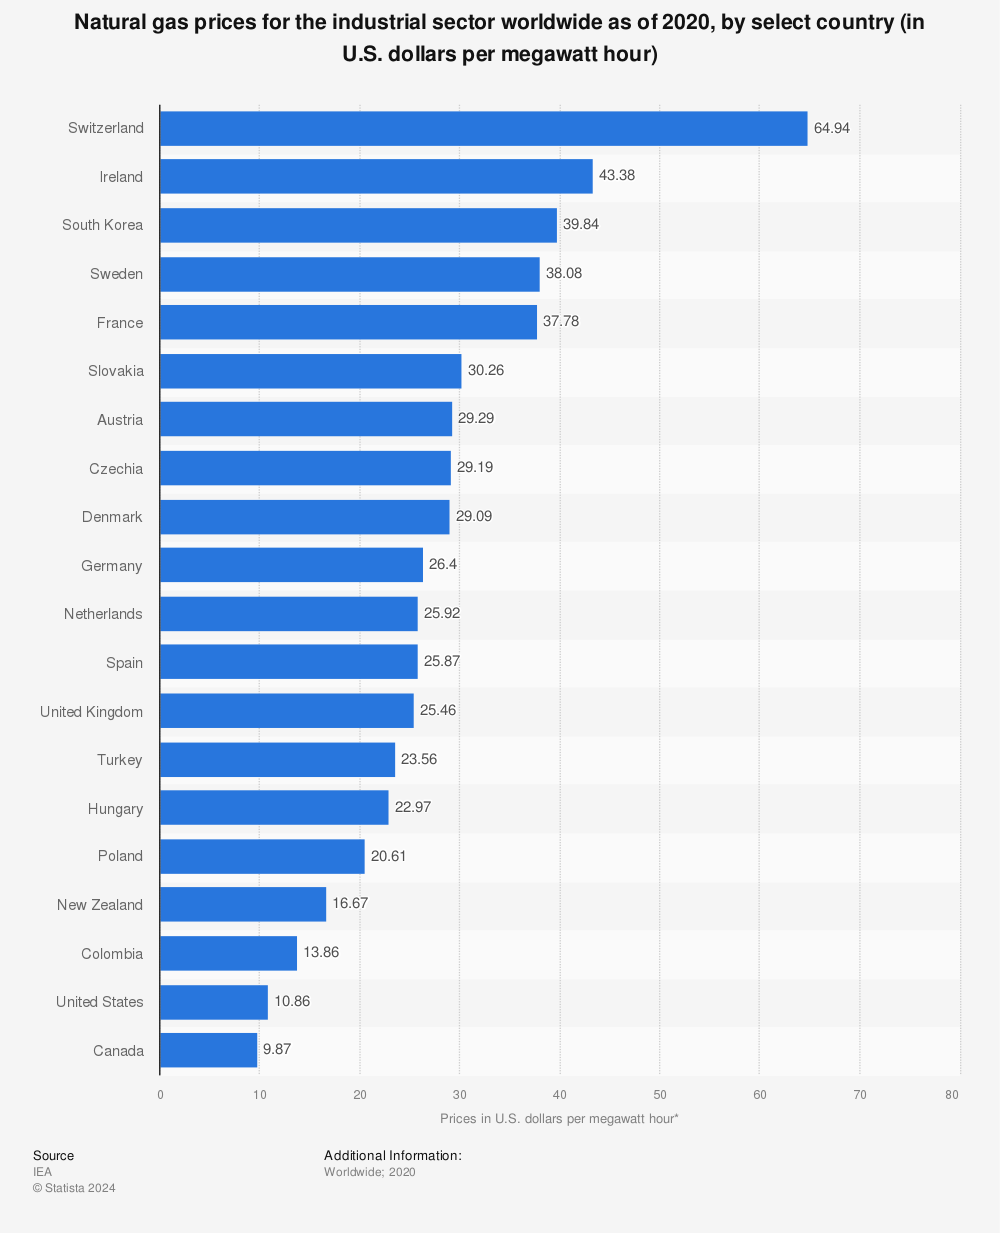 Statistic: Natural gas prices for the industrial sector worldwide as of 2020, by select country (in U.S. dollars per megawatt hour) | Statista